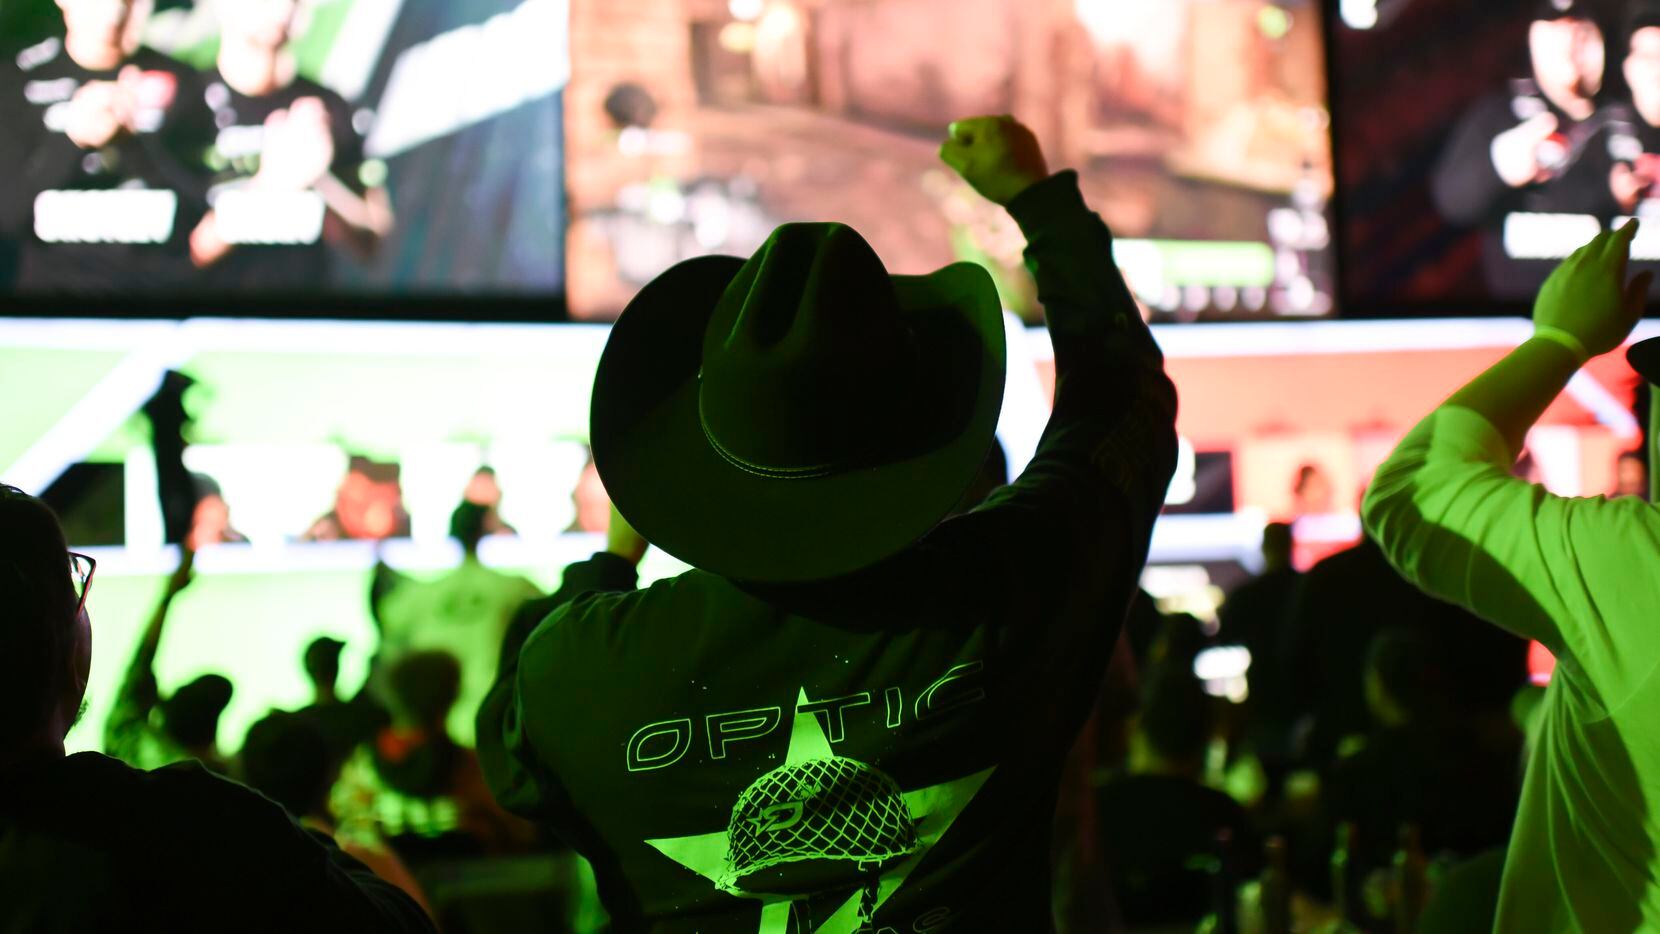 A fan cheers on OpTic Texas as they get closer to defeating the Atlanta FaZe during OpTic...